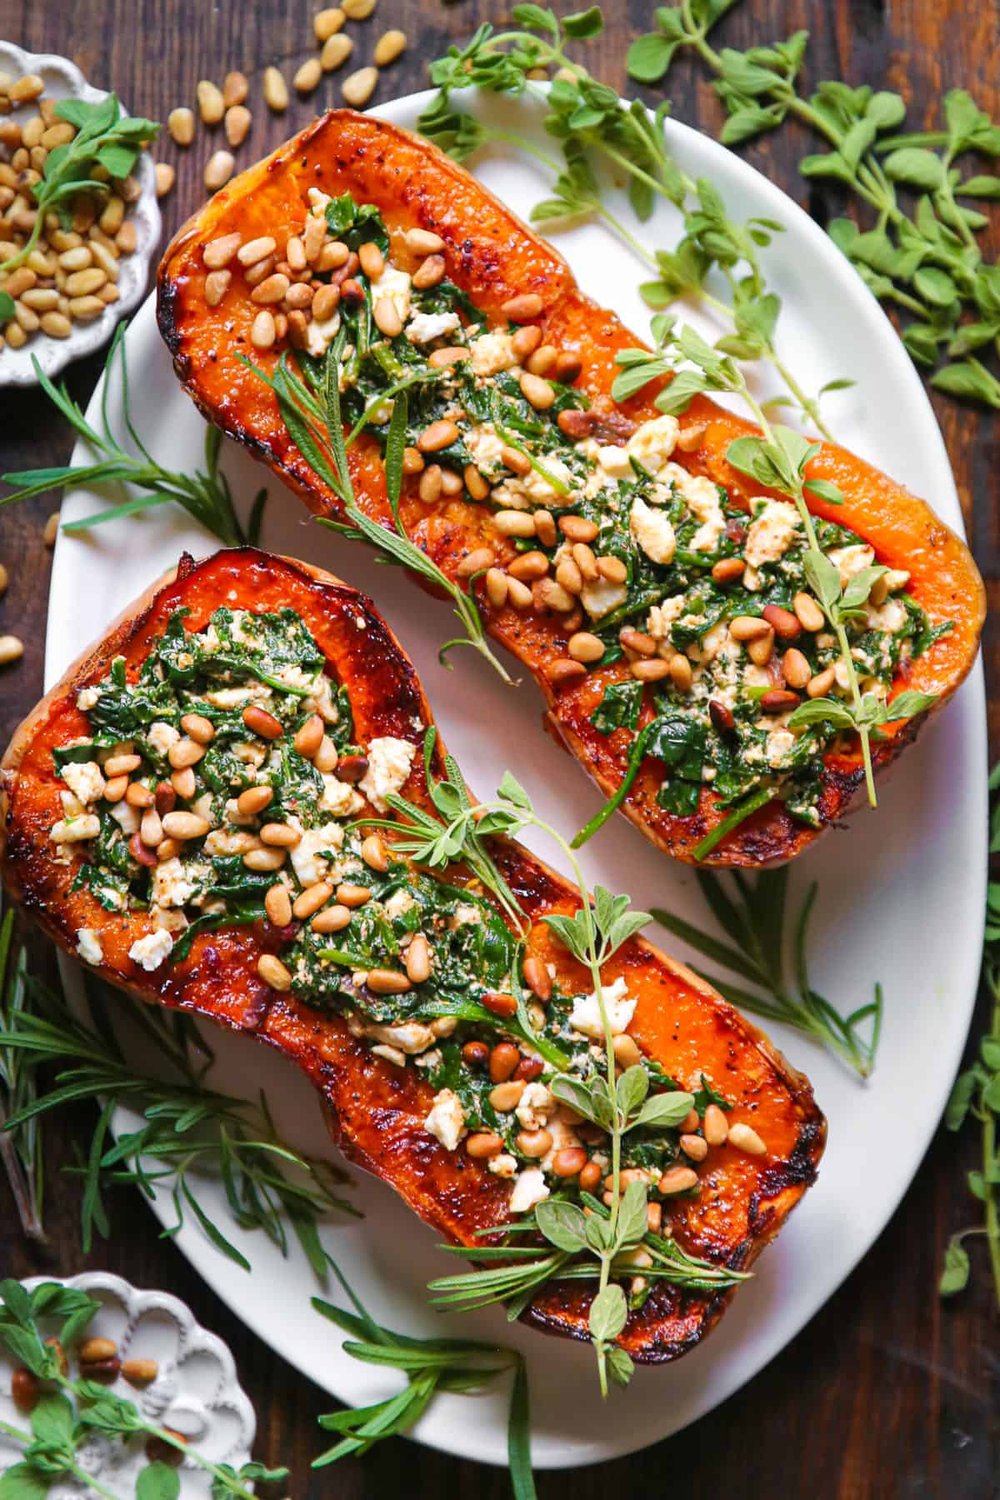 Roasted Butternut Squash with Feta and Spinach